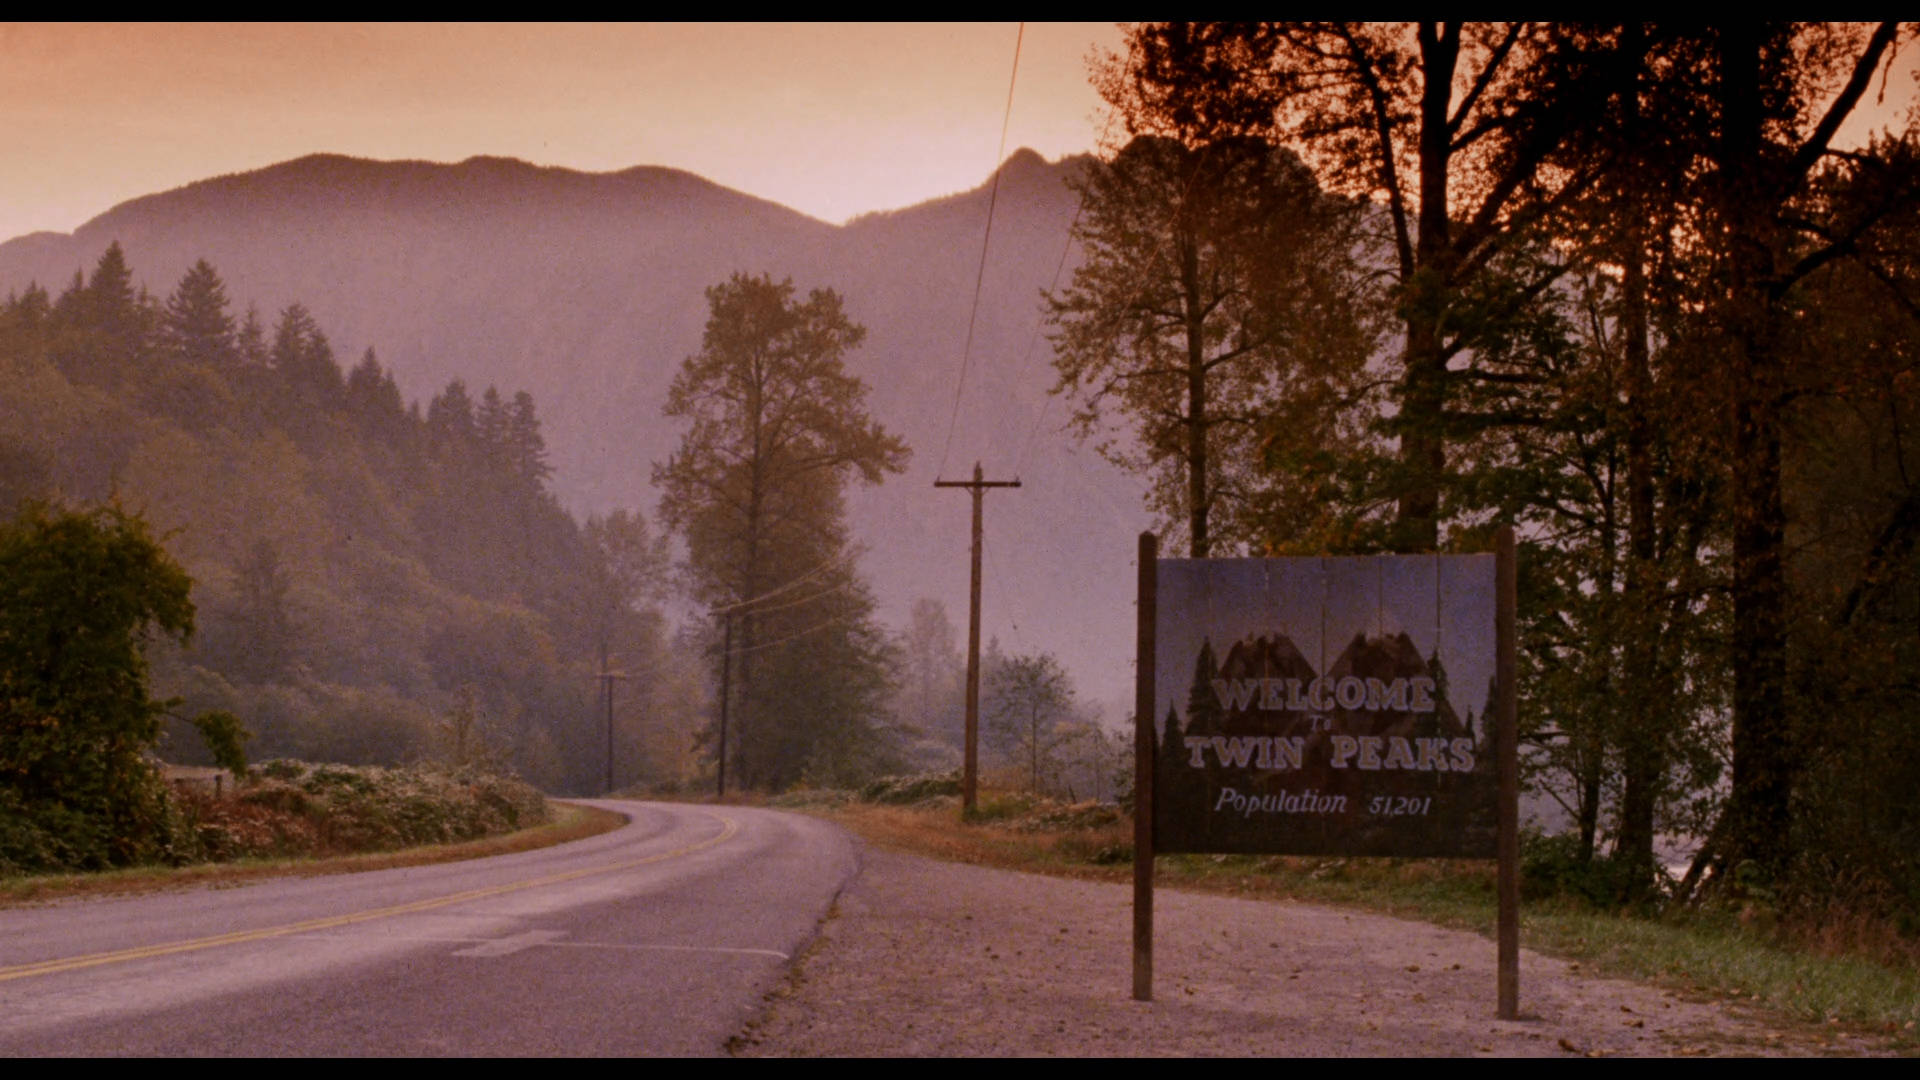 Lynch and Frost's Iconic View of Twin Peaks Wallpaper